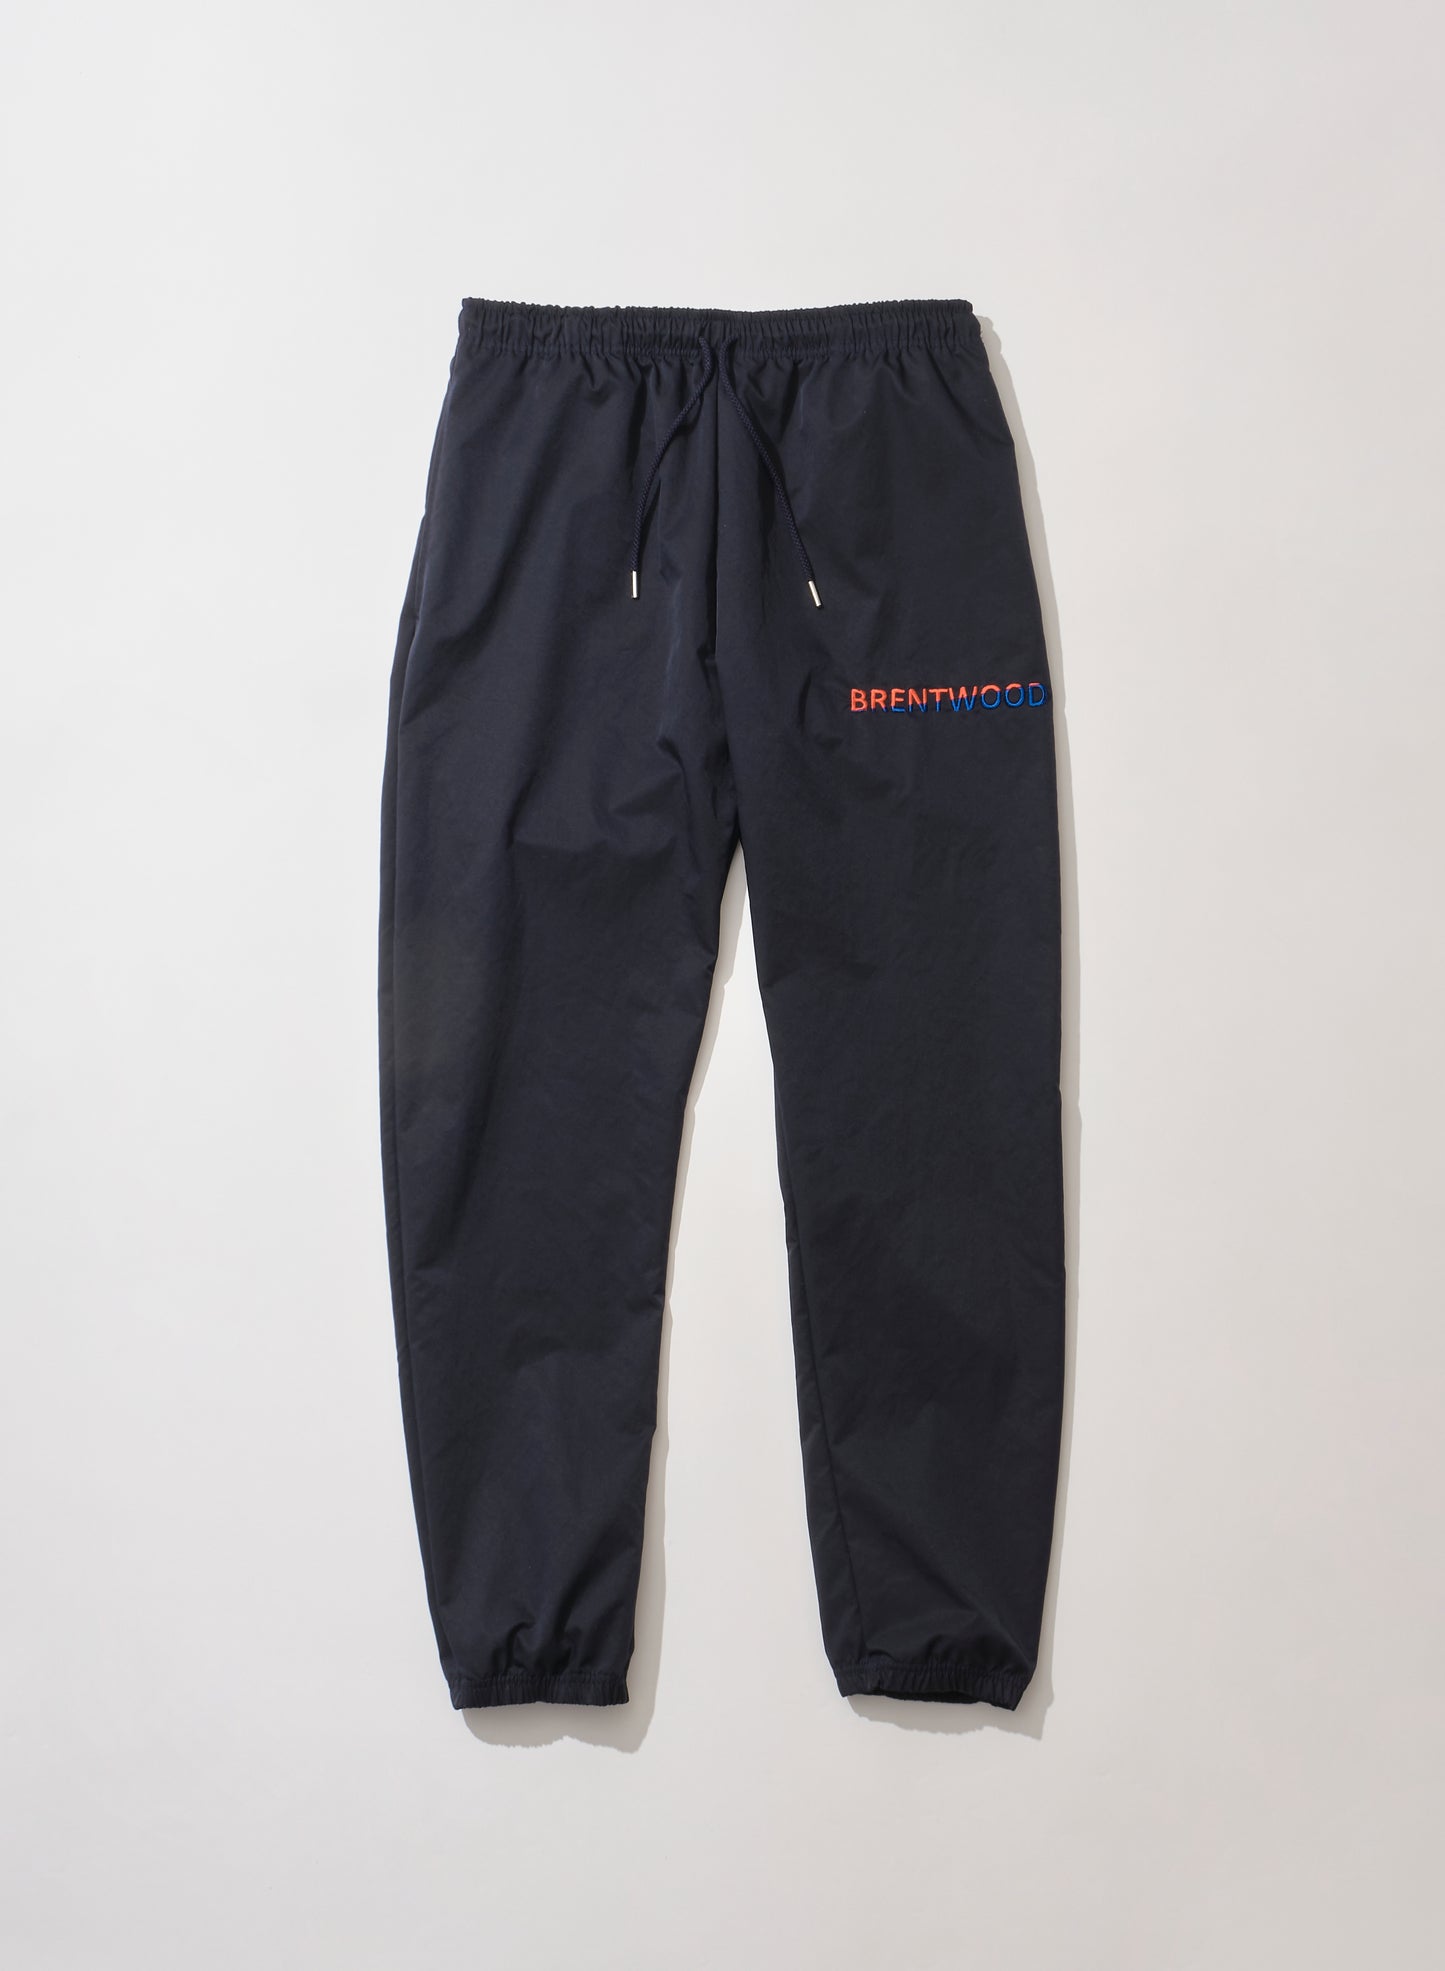 Brentwood Athletic Pants